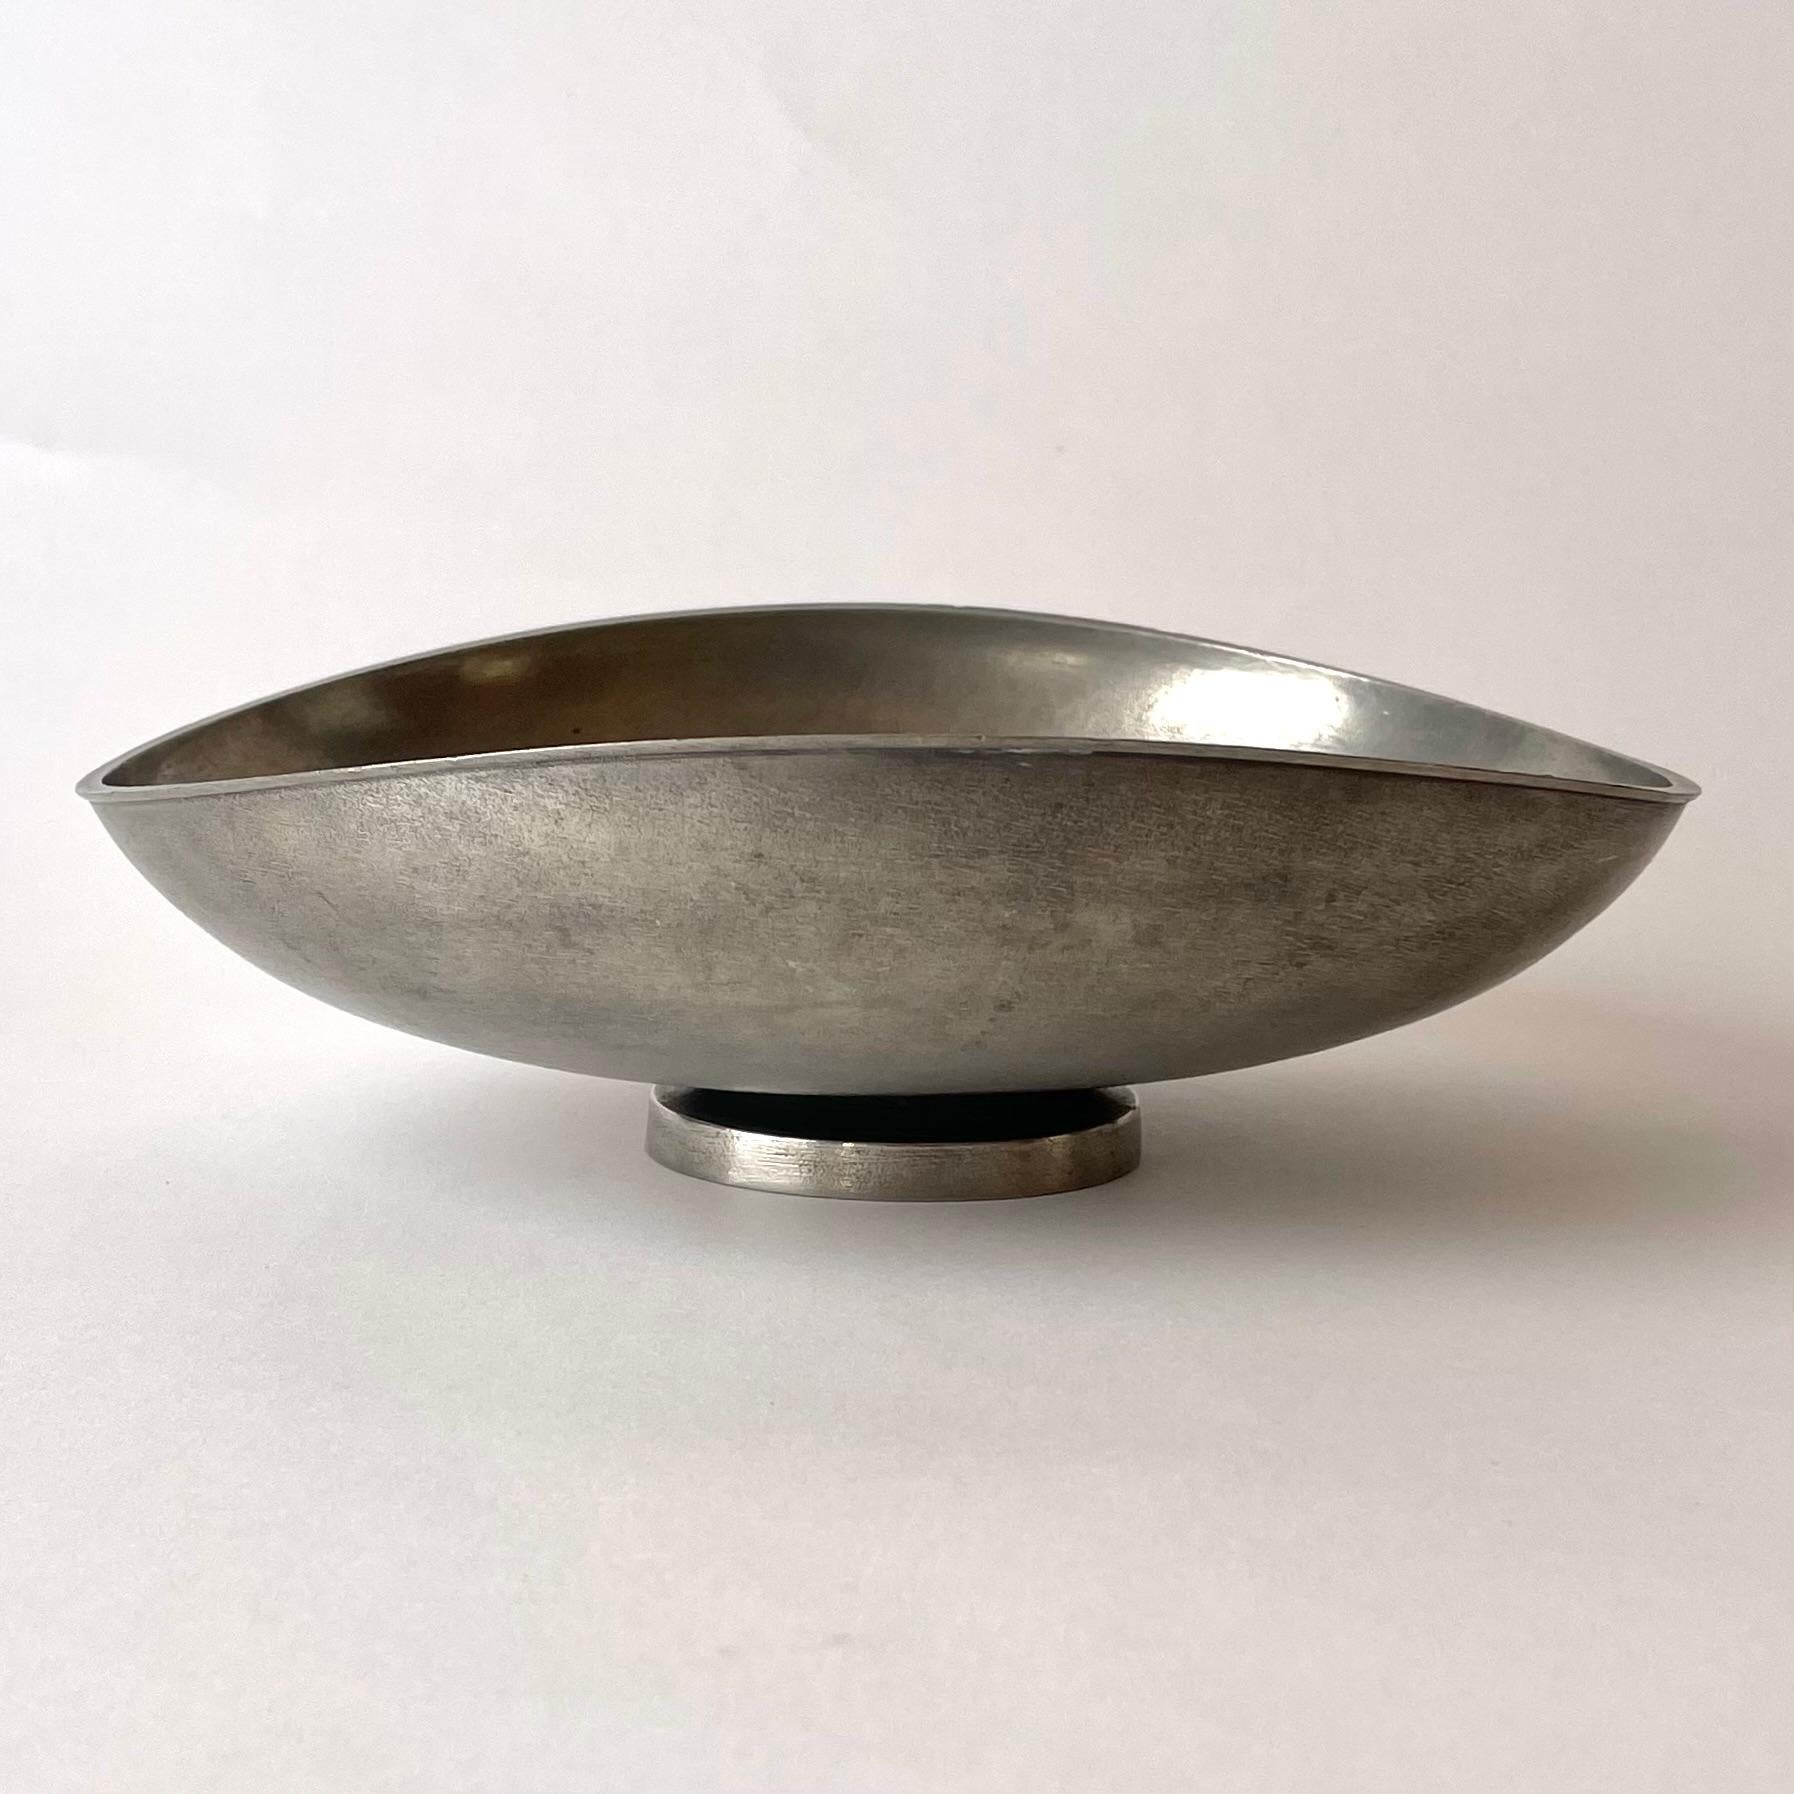 Mid-Century Modern Pewter fruit bowl designed by Edvin Ollers, Sweden. Mid-20th Century